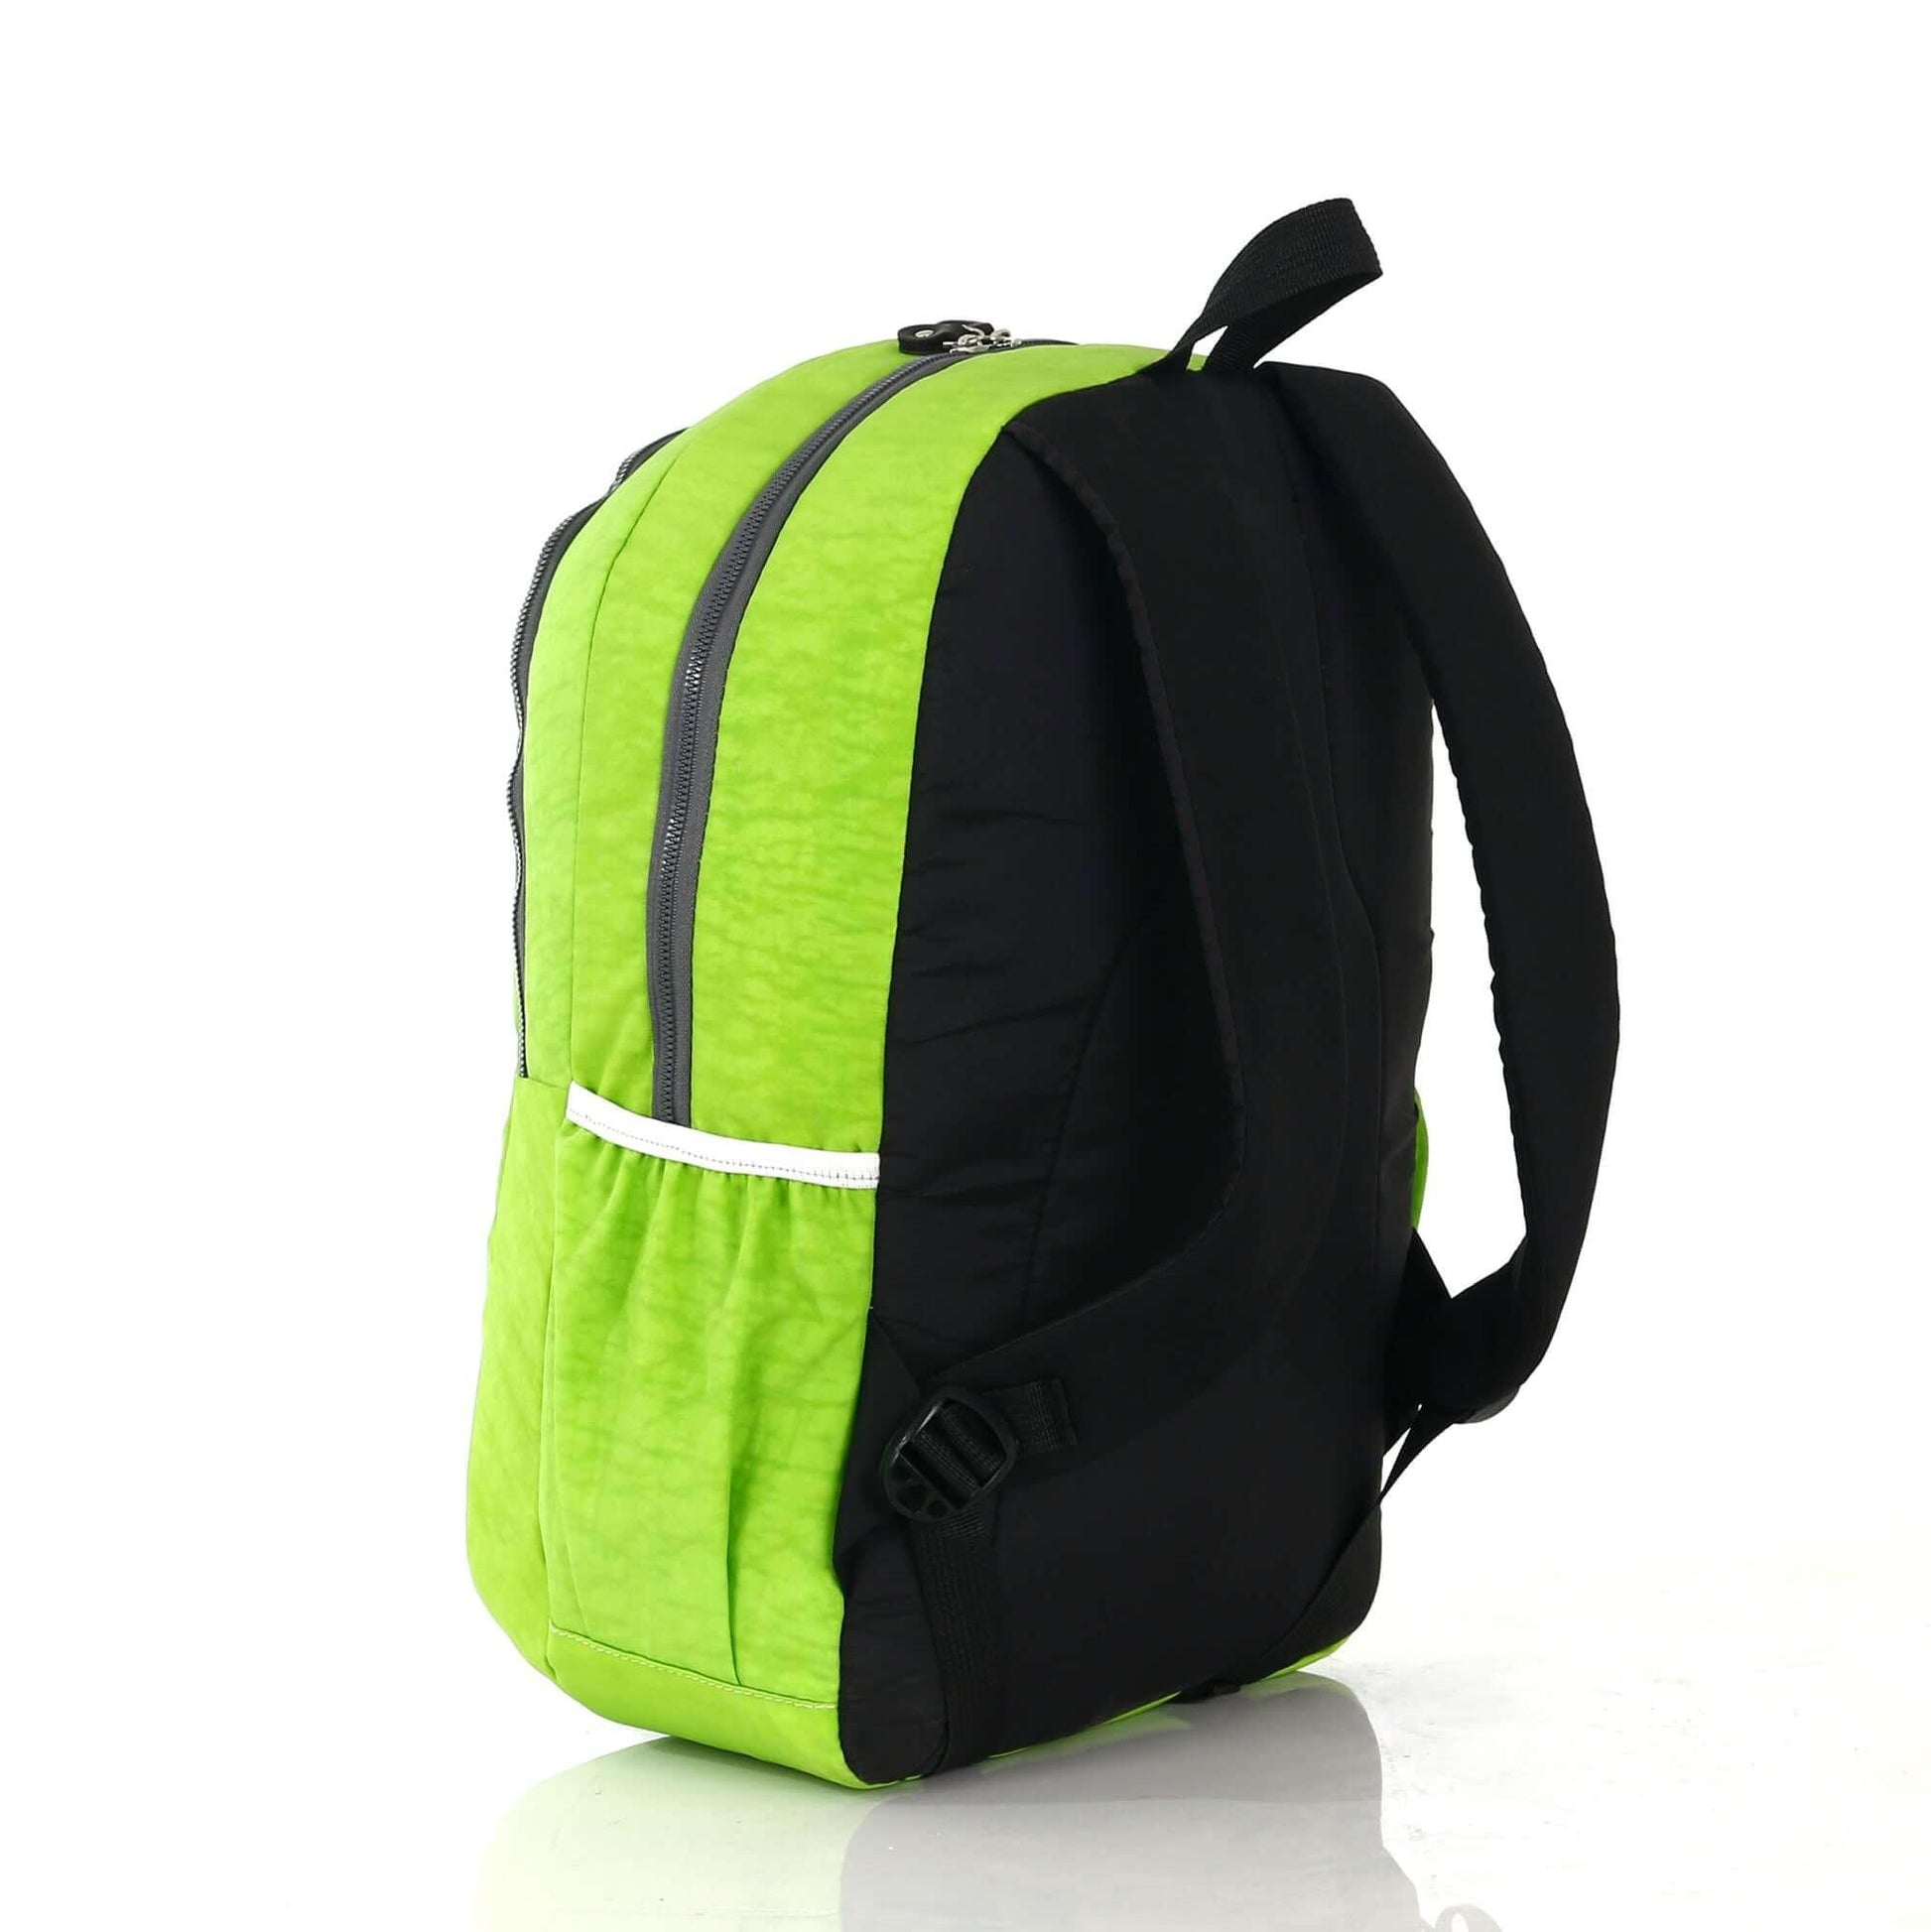 laptop 15.6" Backpack Unisex -Bright green - new edition - FNE-021 - FORCE STORES